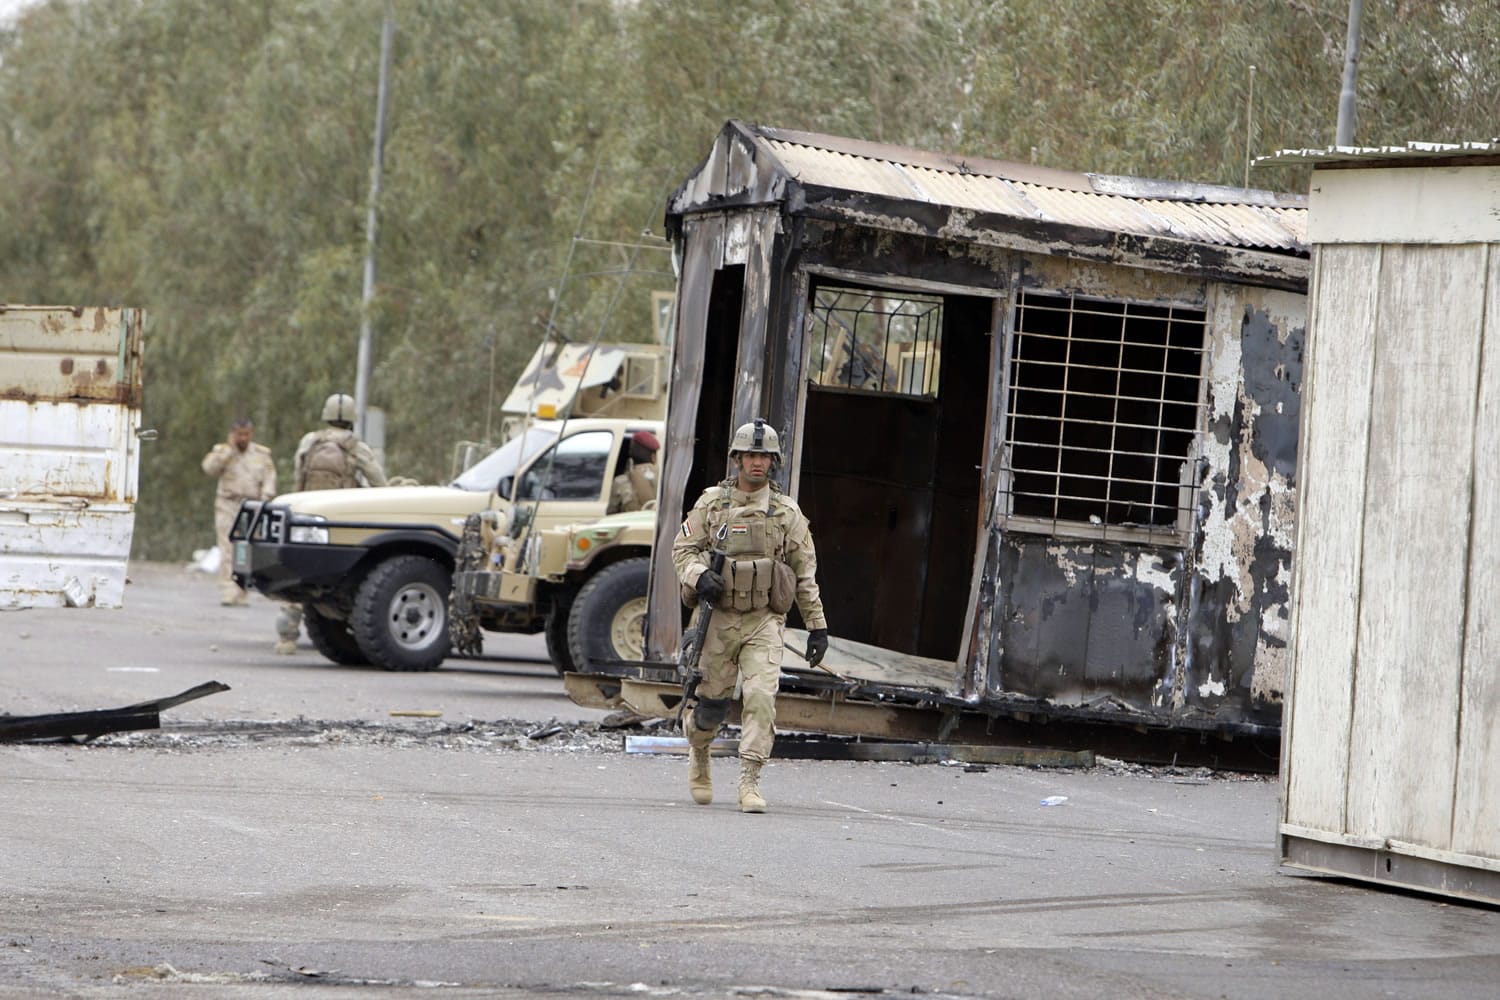 Associated Press files
Iraqi Army soldiers stand guard near burned trailers at Camp Ashraf north of Baghdad, Iraq, in April 2011. More than 50 members of an Iranian dissident group were killed inside the camp Sunday.